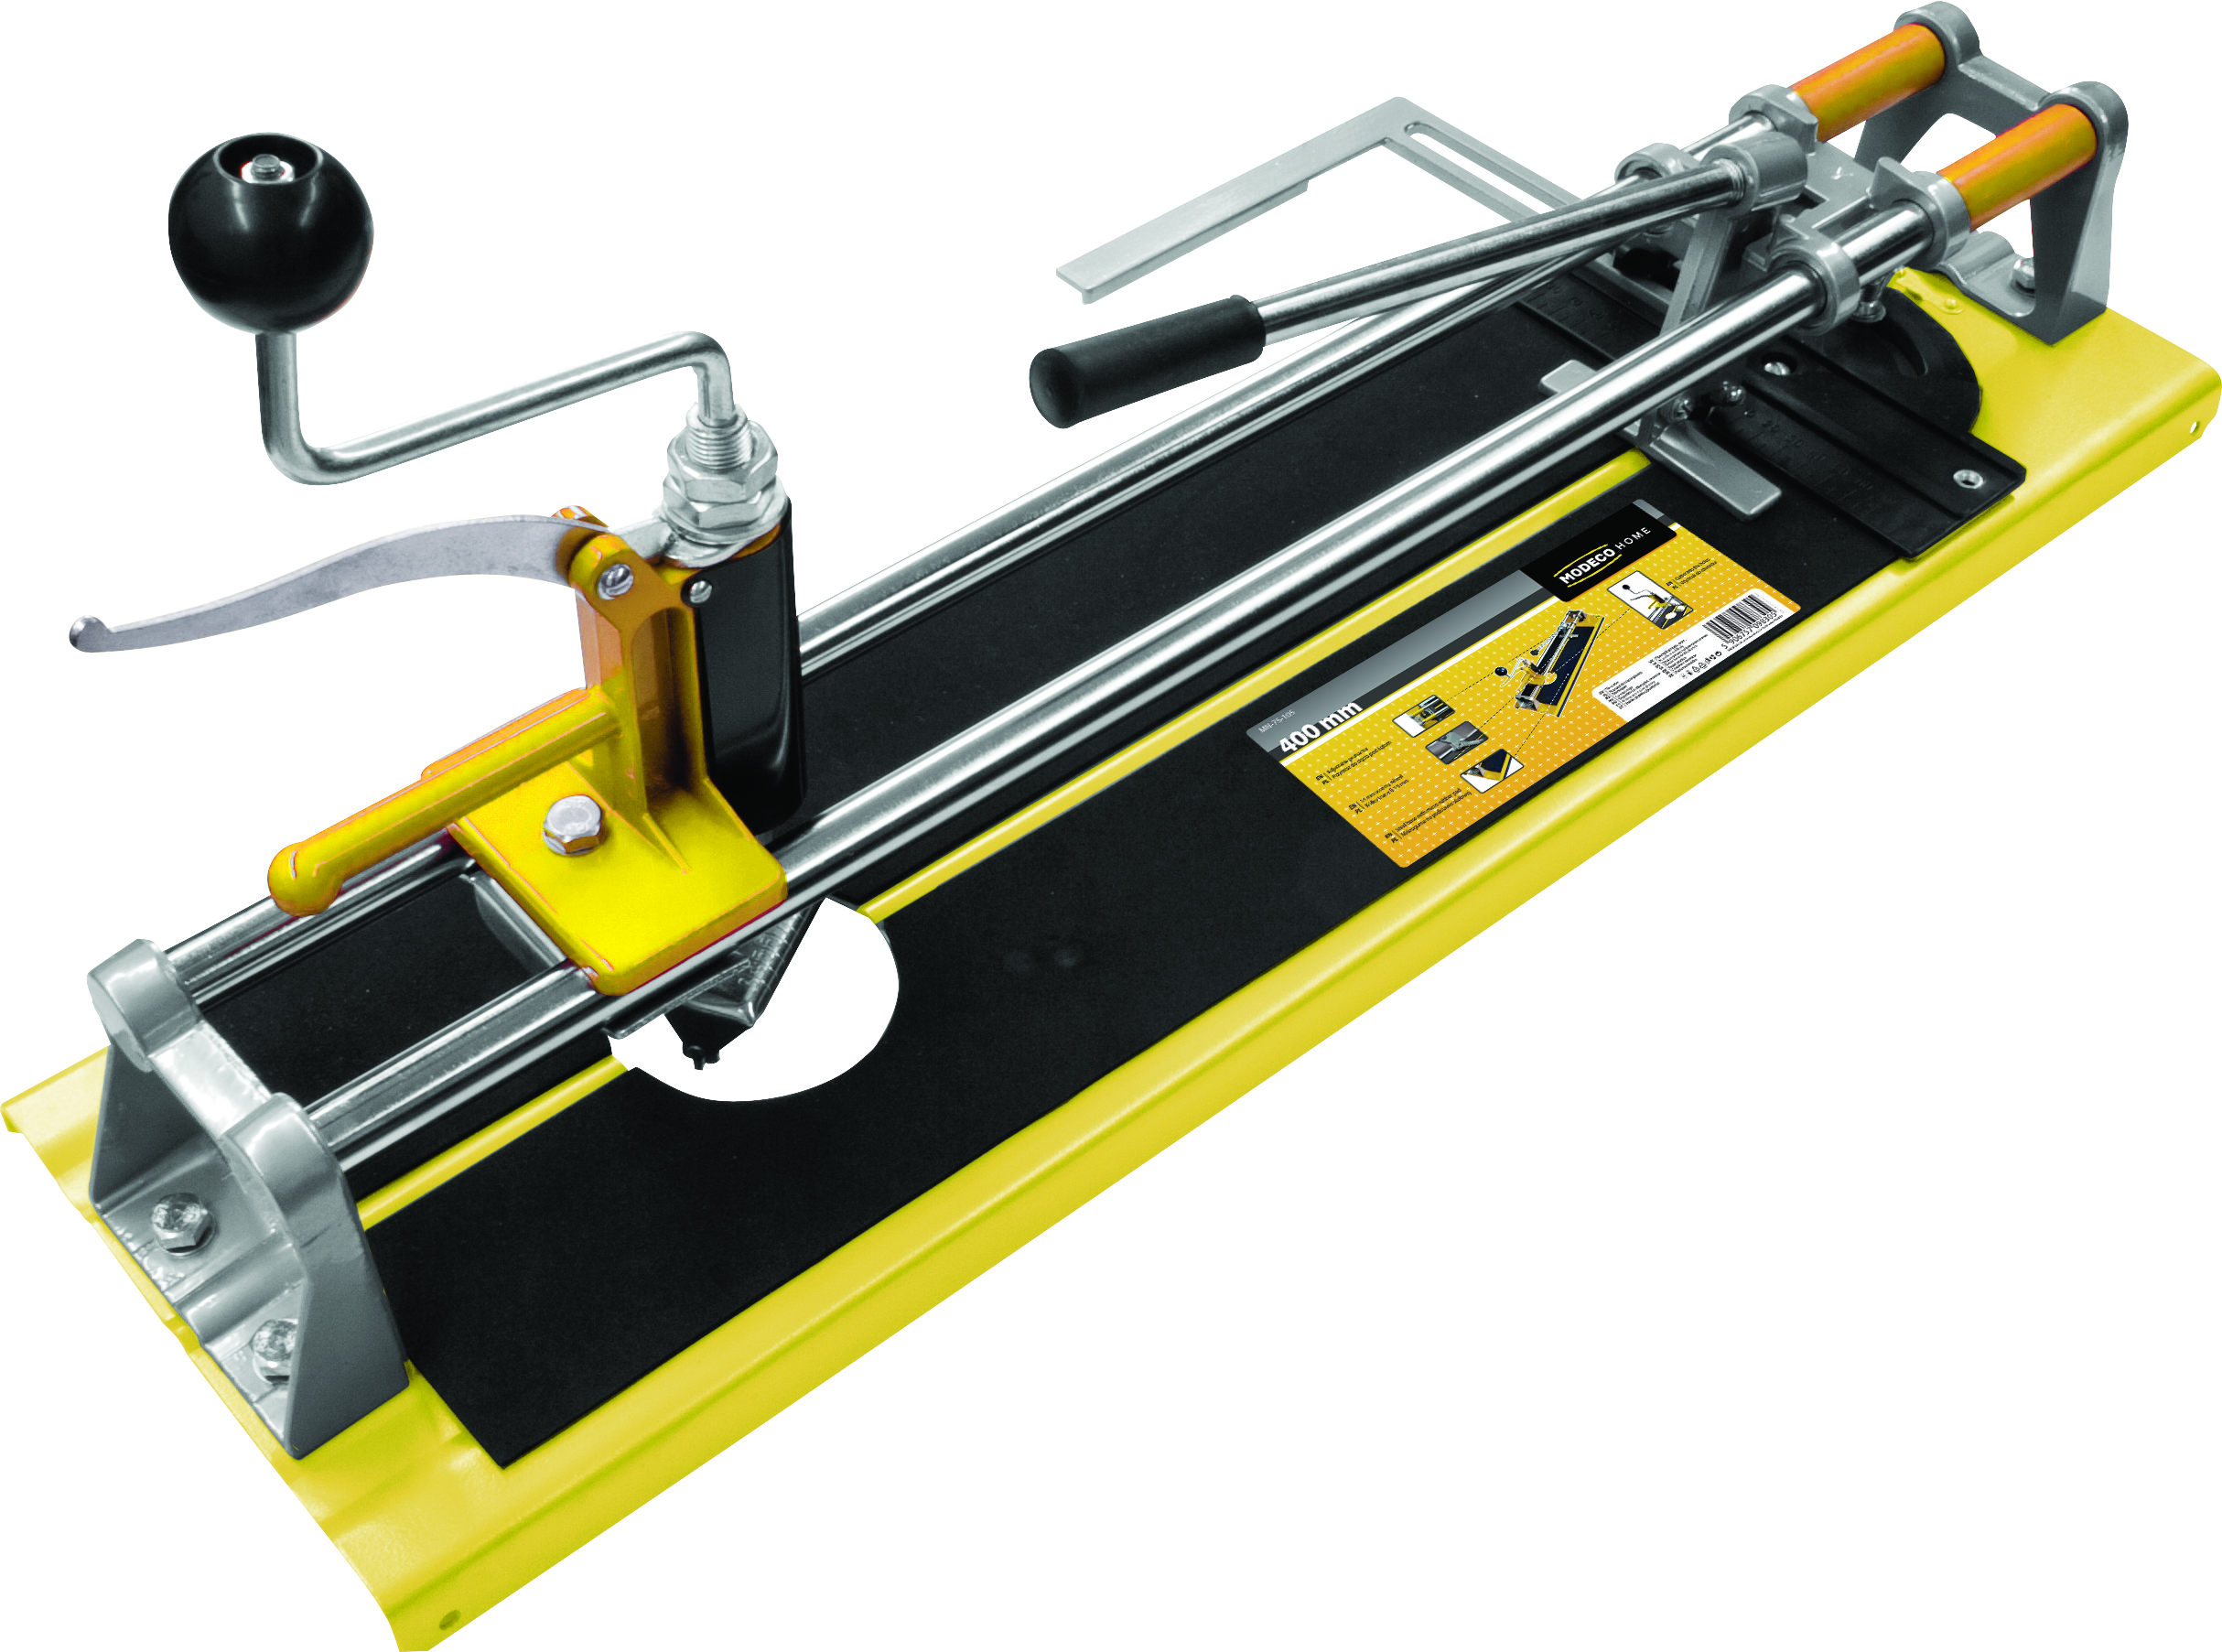 MN-75-106 Tile cutter with hole cutter 500 mm